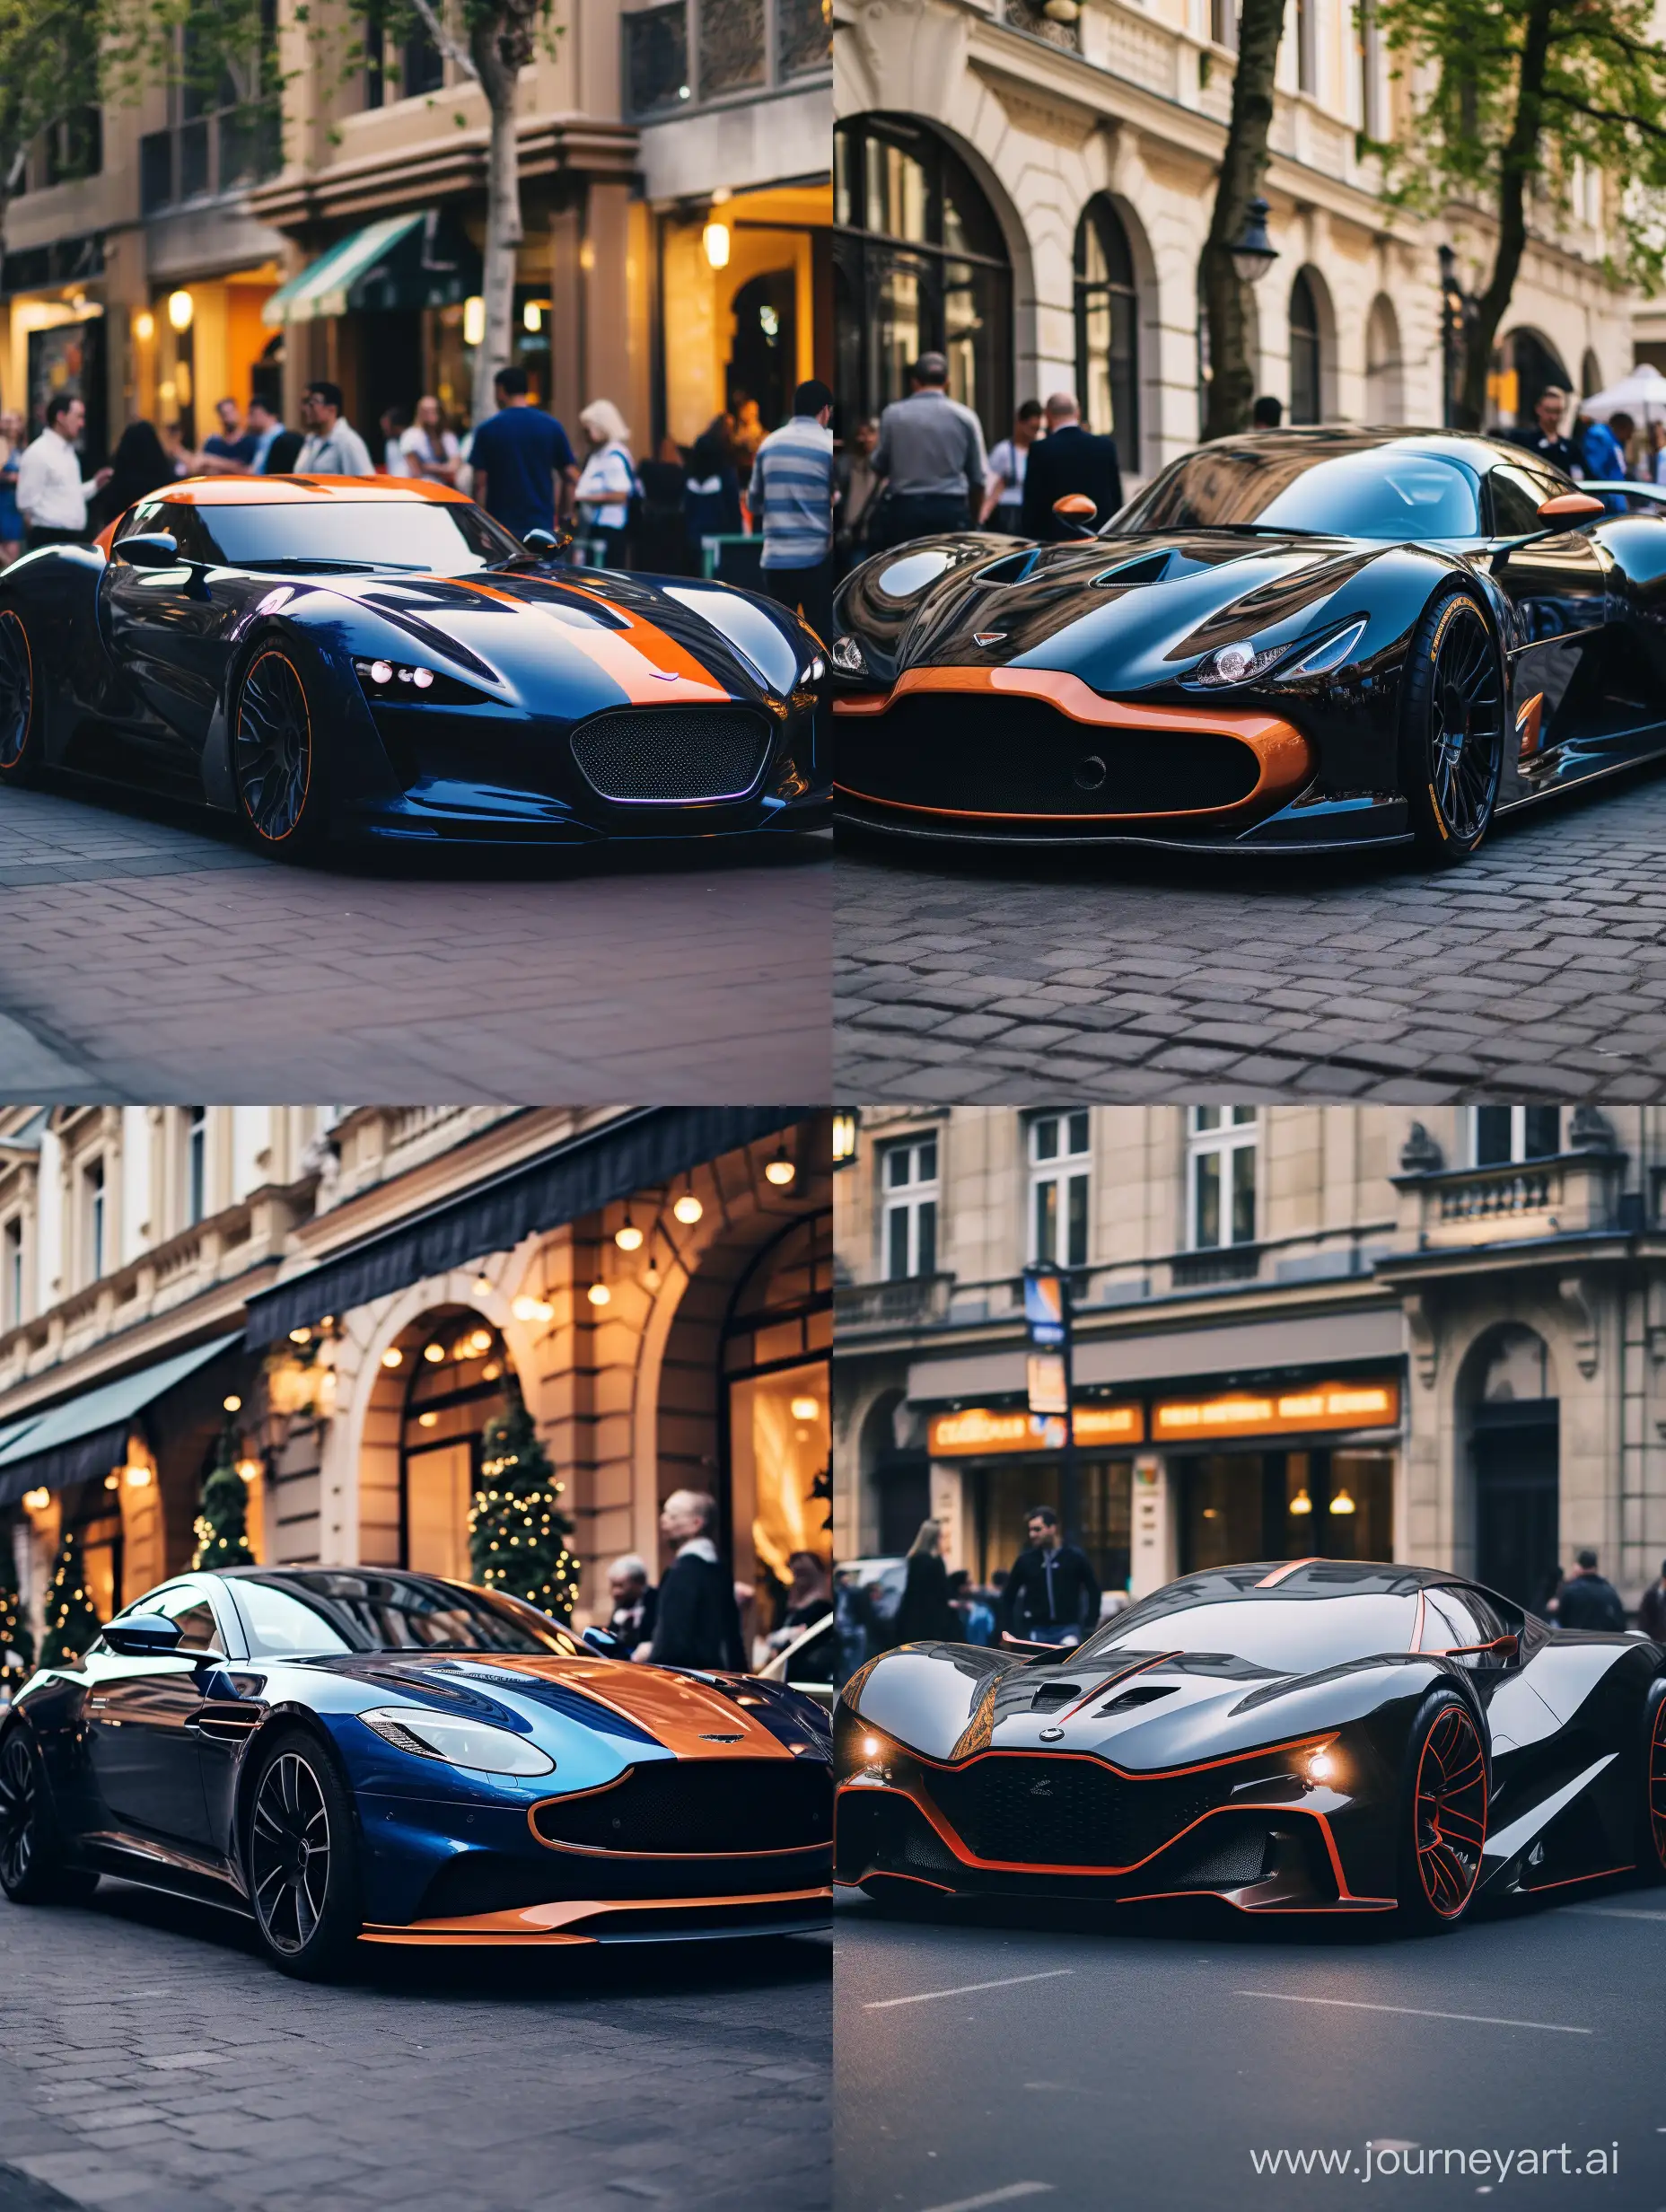 Custom-Orange-and-Black-Sports-Car-with-Unique-Design-and-Blue-Lights